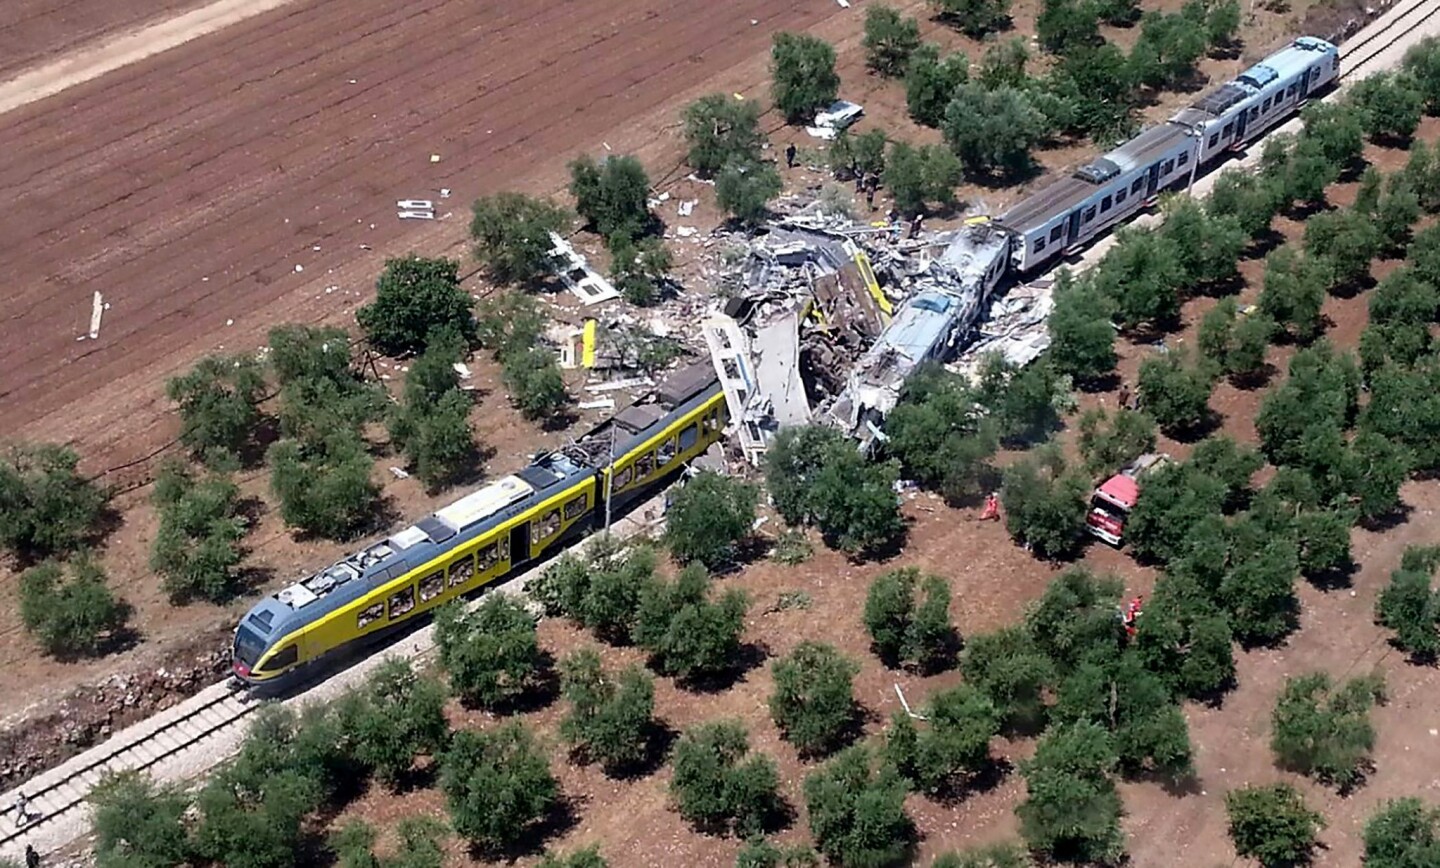 Image released by the Italian firefighters Vigili del Fuoco shows two smashed carriages thrown across the tracks after a head-on collision of two trains between Ruvo and Corato, in the southern Italian region of Puglia.